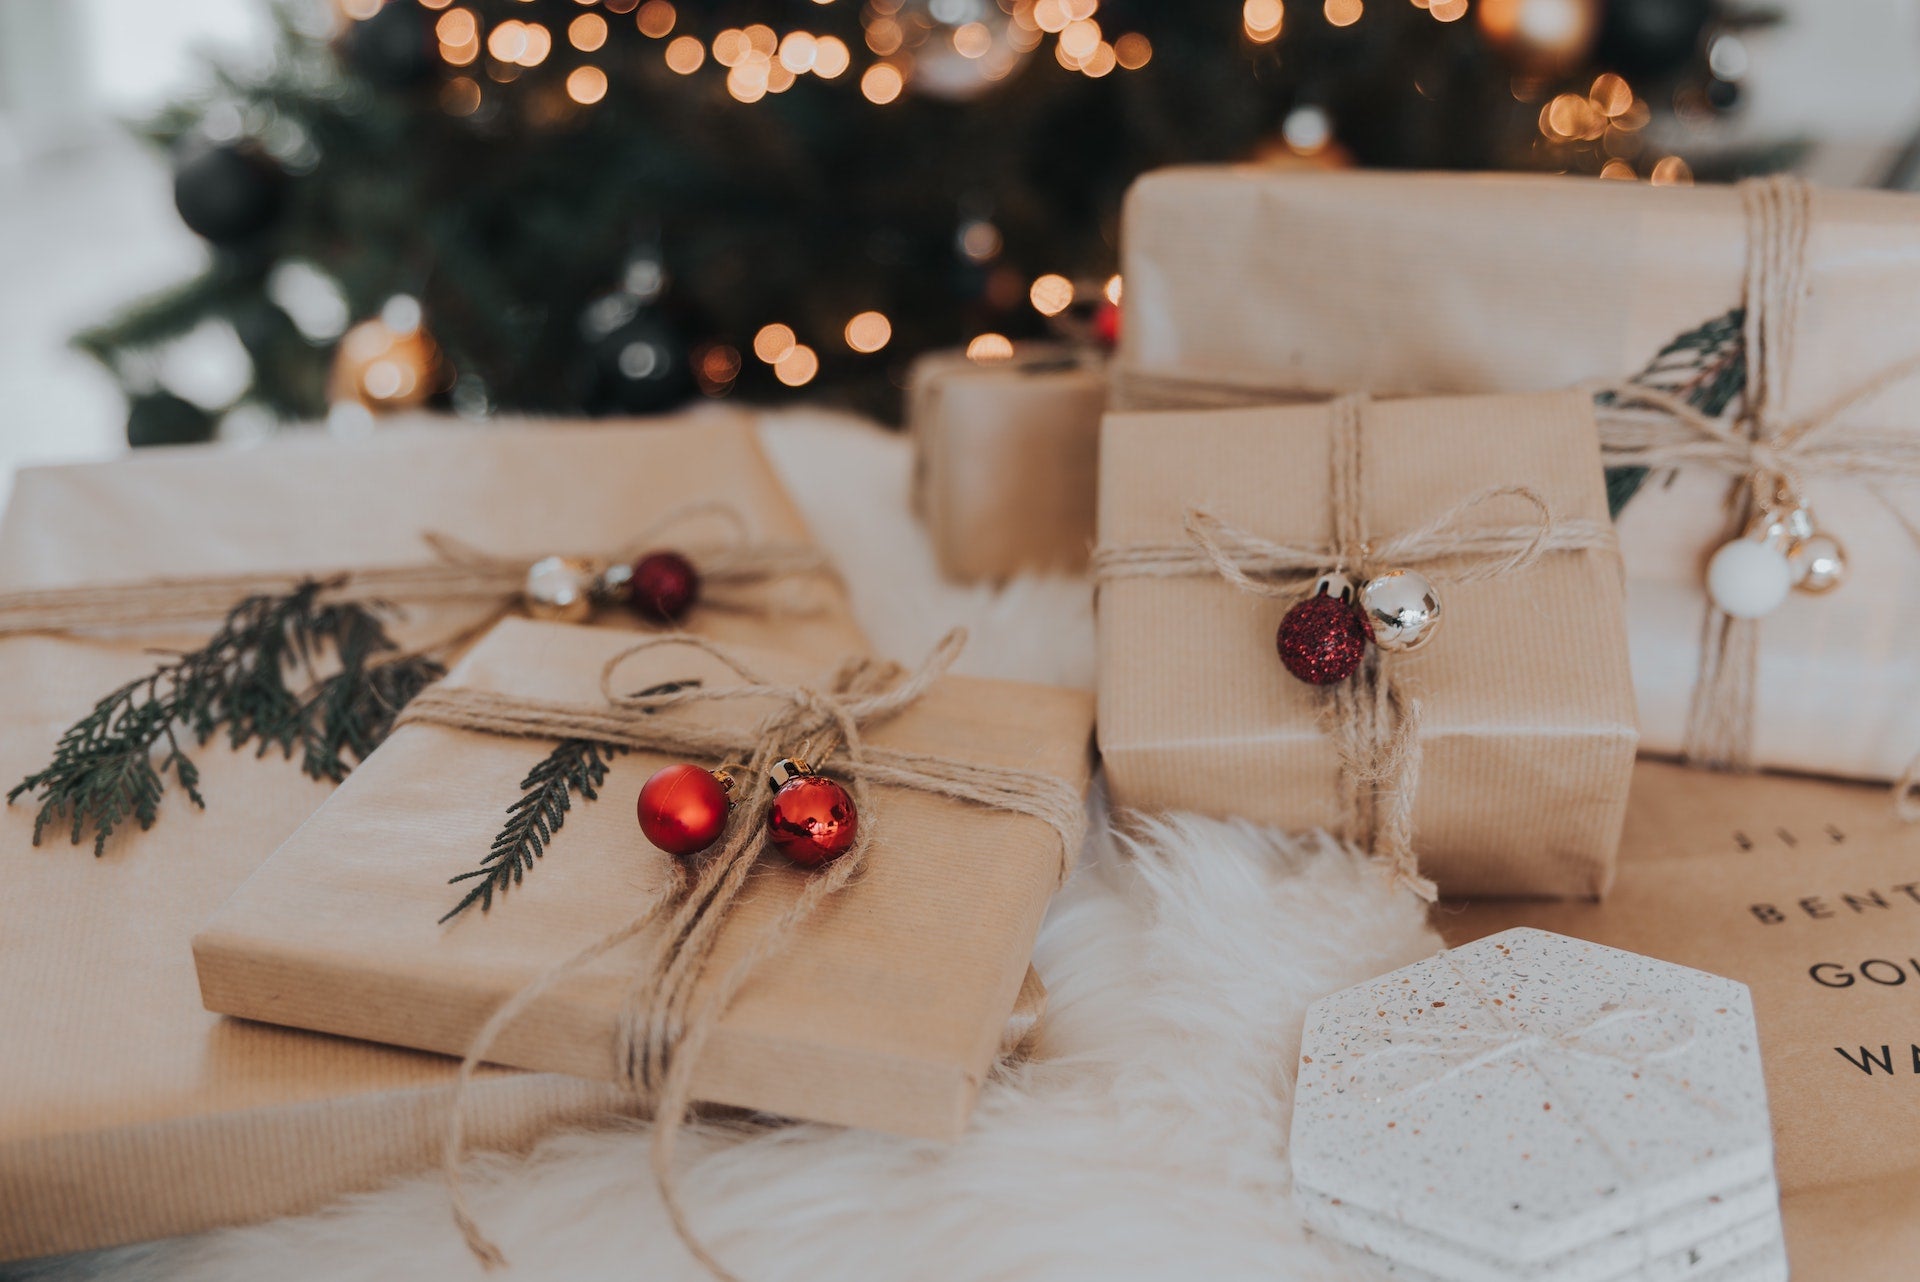 Christmas Wish List - Gift Ideas for Loved Ones